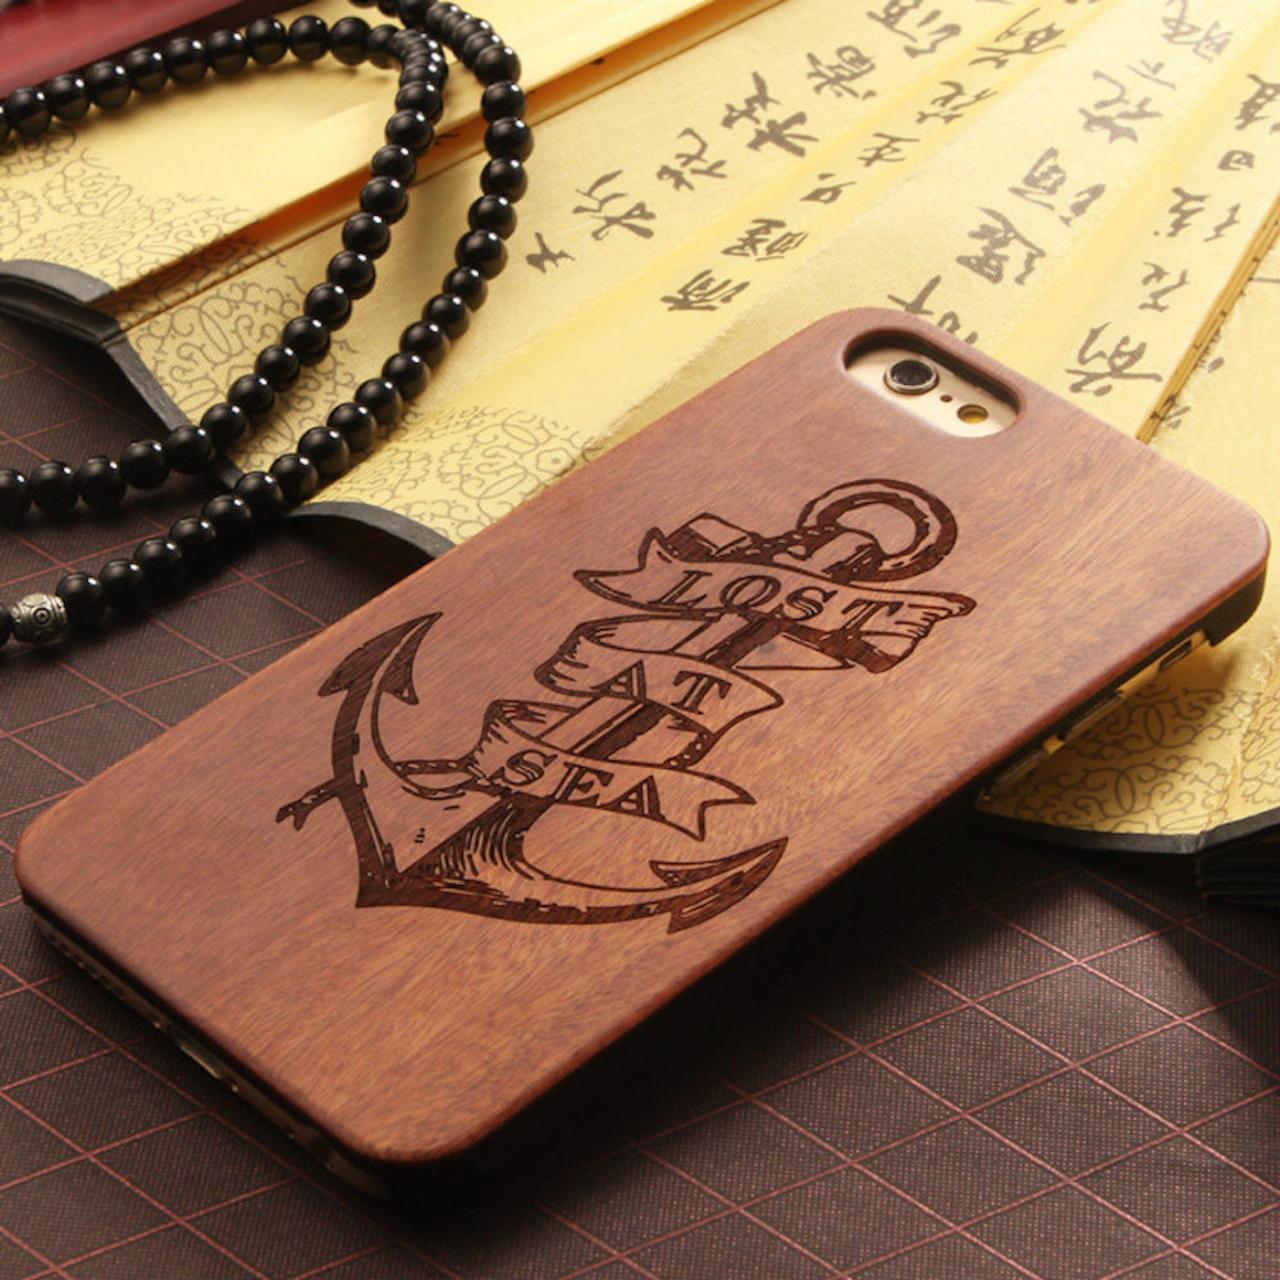 Luxury Natural Wood Wooden Bamboo Hard Cover Phone Case For Apple Iphone 6/6s/plus, Anchor